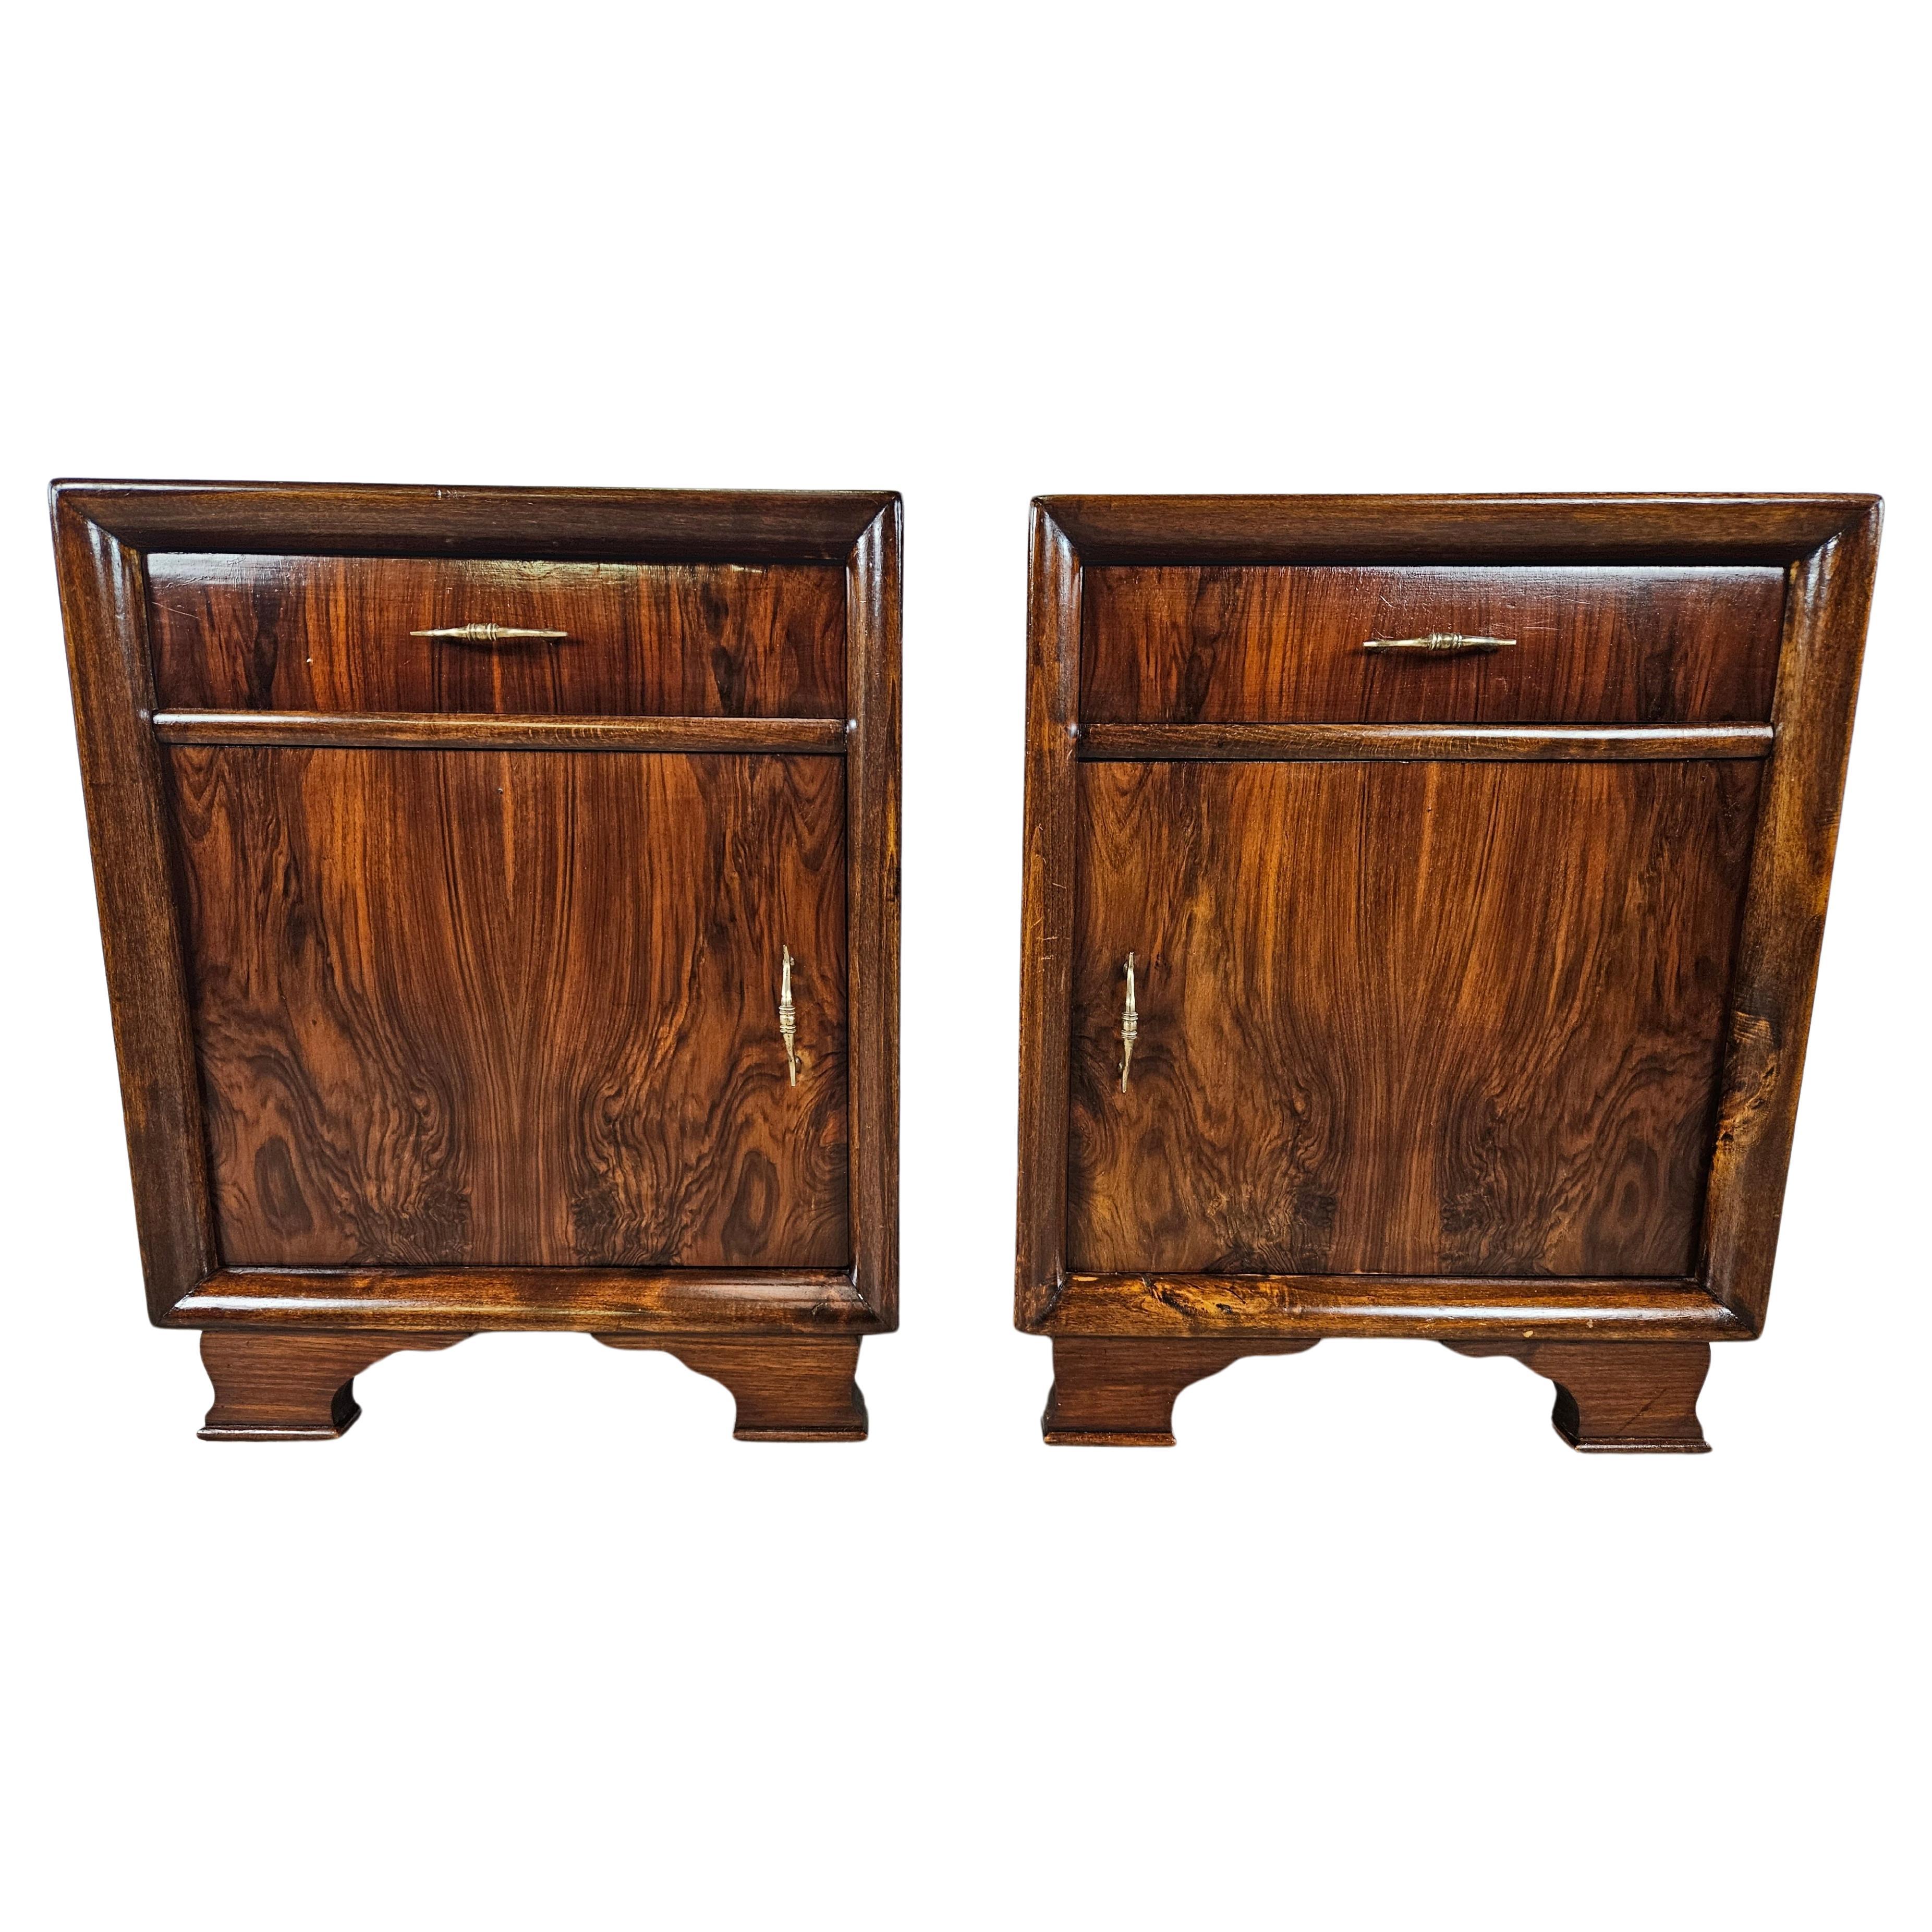 Bedside tables in walnut burl bedstead with brass handles 1940s